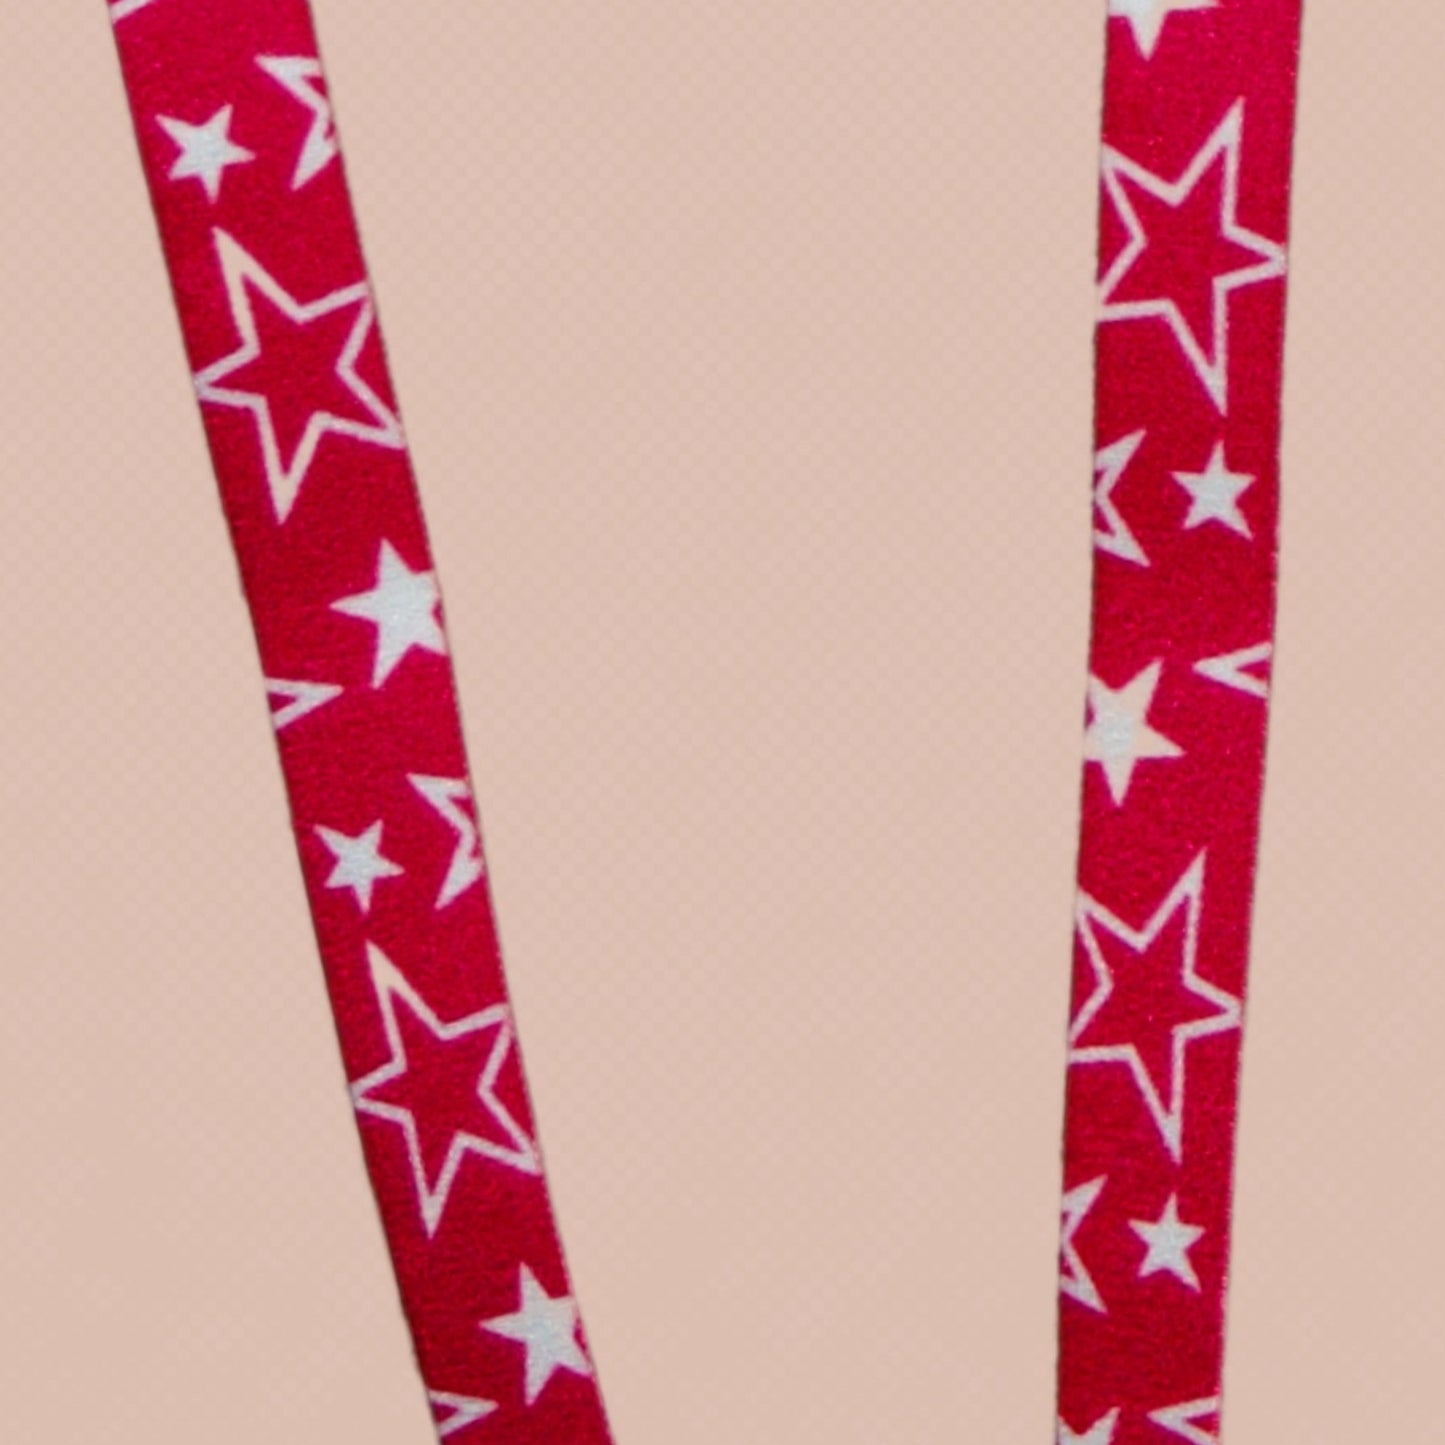 Twinkle Her-Rah Straps - Hot Pink straps with a mix of solid white and outlined stars in varied sizes, featuring white coated hardware.